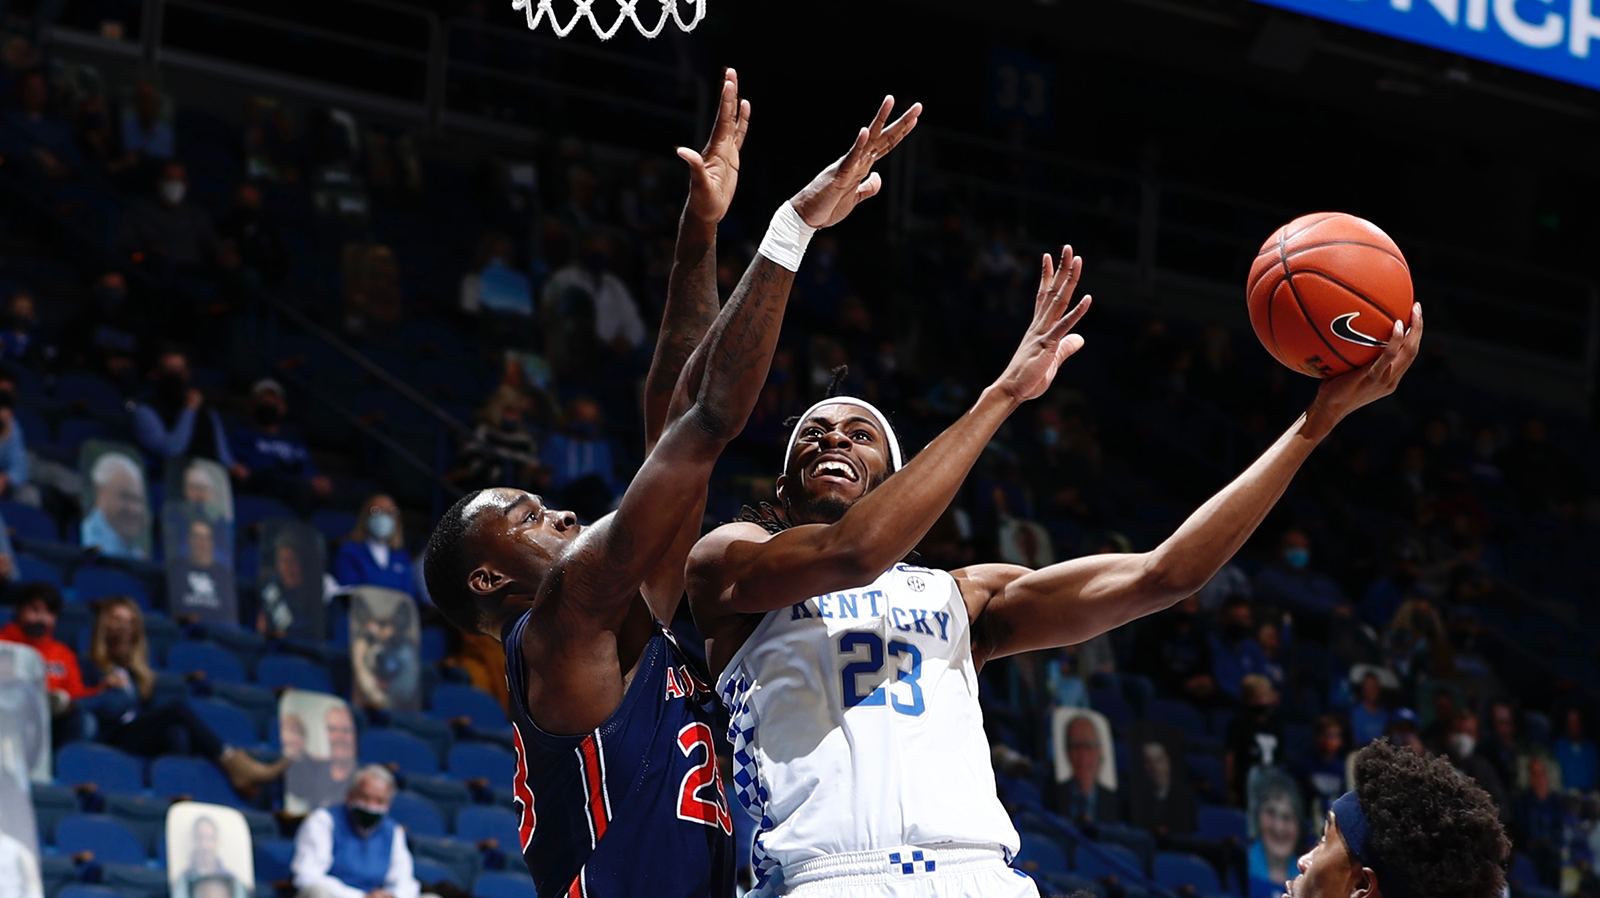 Cats Snap Skid with Tight Win Over Auburn